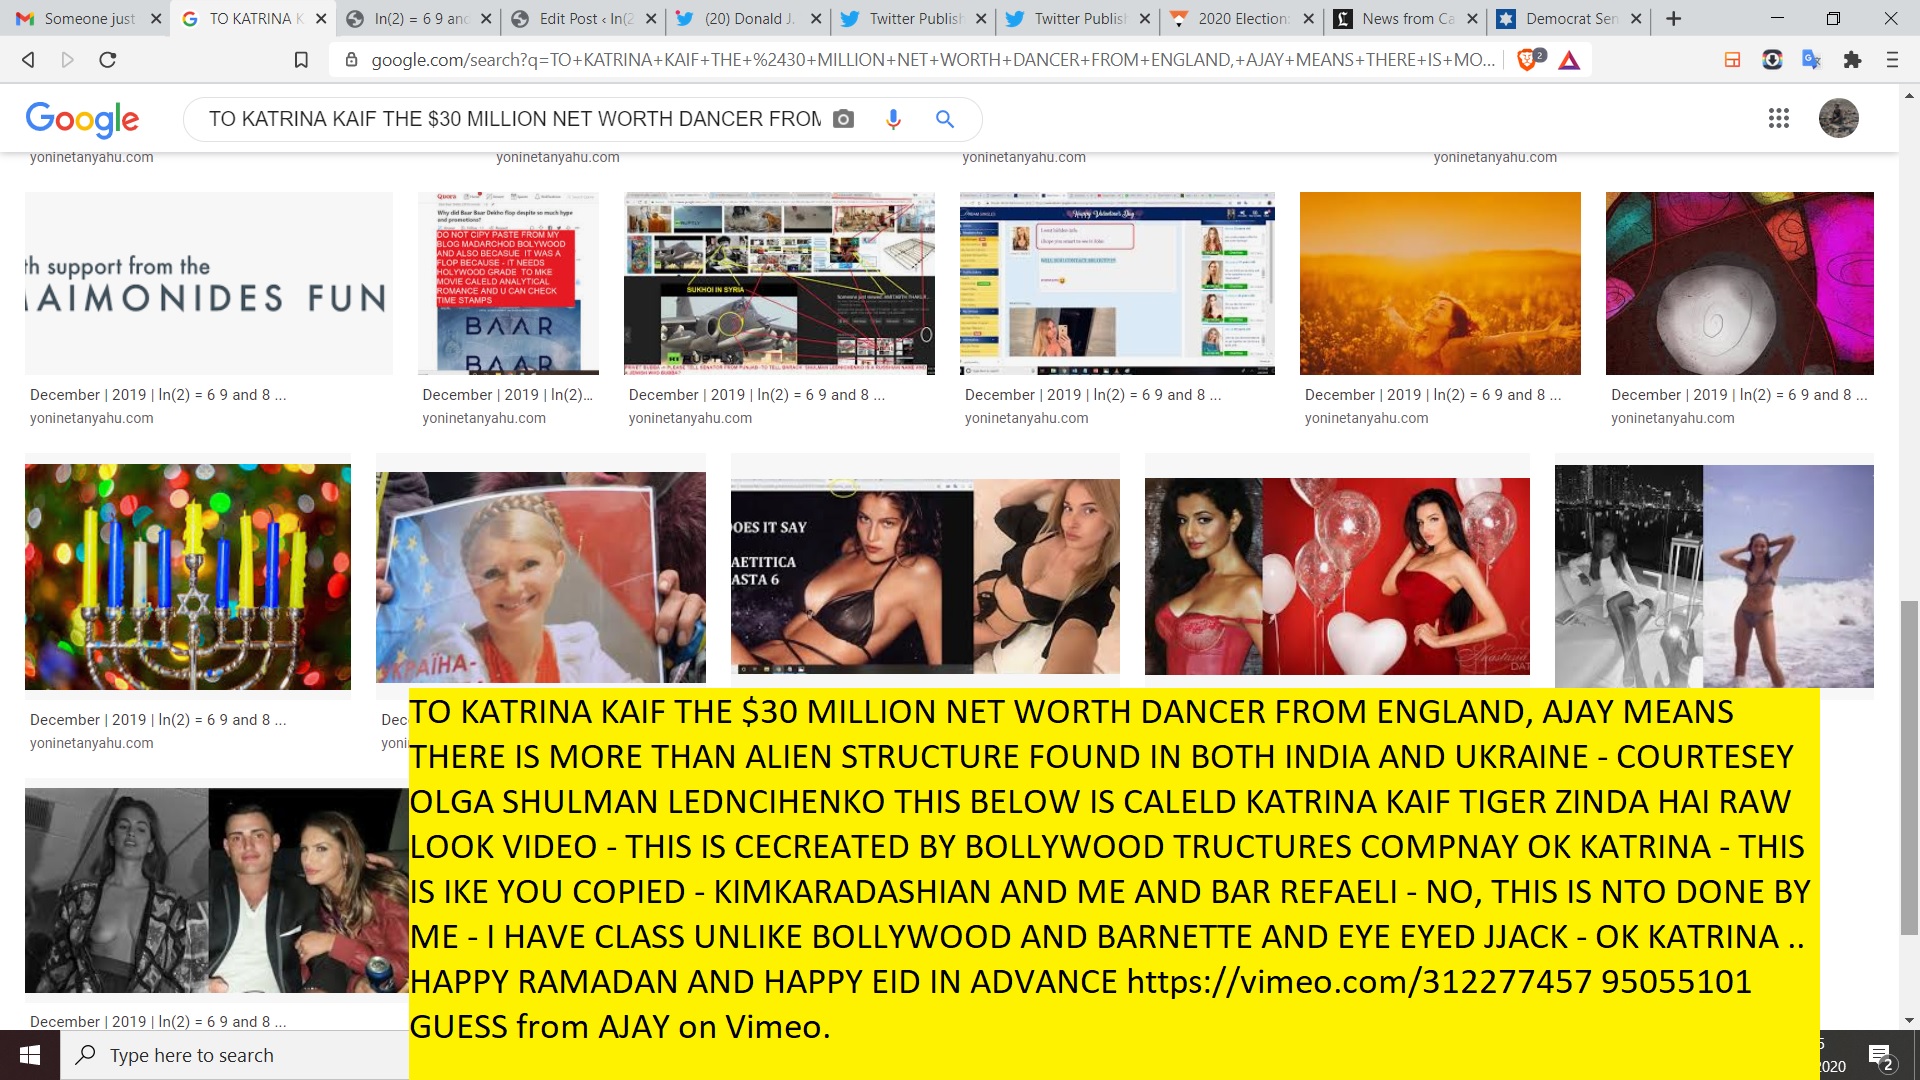 TO KATRINA KAIF THE $30 MILLION NET WORTH DANCER FROM ENGLAND, AJAY MEANS THERE IS MORE THAN ALIEN STRUCTURE FOUND IN BOTH INDIA AND UKRAINE - COURTESEY OLGA SHULMAN LEDNCIHENKO THIS BELOW IS CALELD KATRINA KAIF TIGER ZINDA HAI RAW LOOK VIDEO - THIS IS CECREATED BY BOLLYWOOD TRUCTURES COMPNAY OK KATRINA - THIS IS IKE YOU COPIED - KIMKARADASHIAN AND ME AND BAR REFAELI - NO, THIS IS NTO DONE BY ME - I HAVE CLASS UNLIKE BOLLYWOOD AND BARNETTE AND EYE EYED JJACK - OK KATRINA .. HAPPY RAMADAN AND HAPPY EID IN ADVANCE https://vimeo.com/312277457 95055101 GUESS from AJAY on Vimeo.